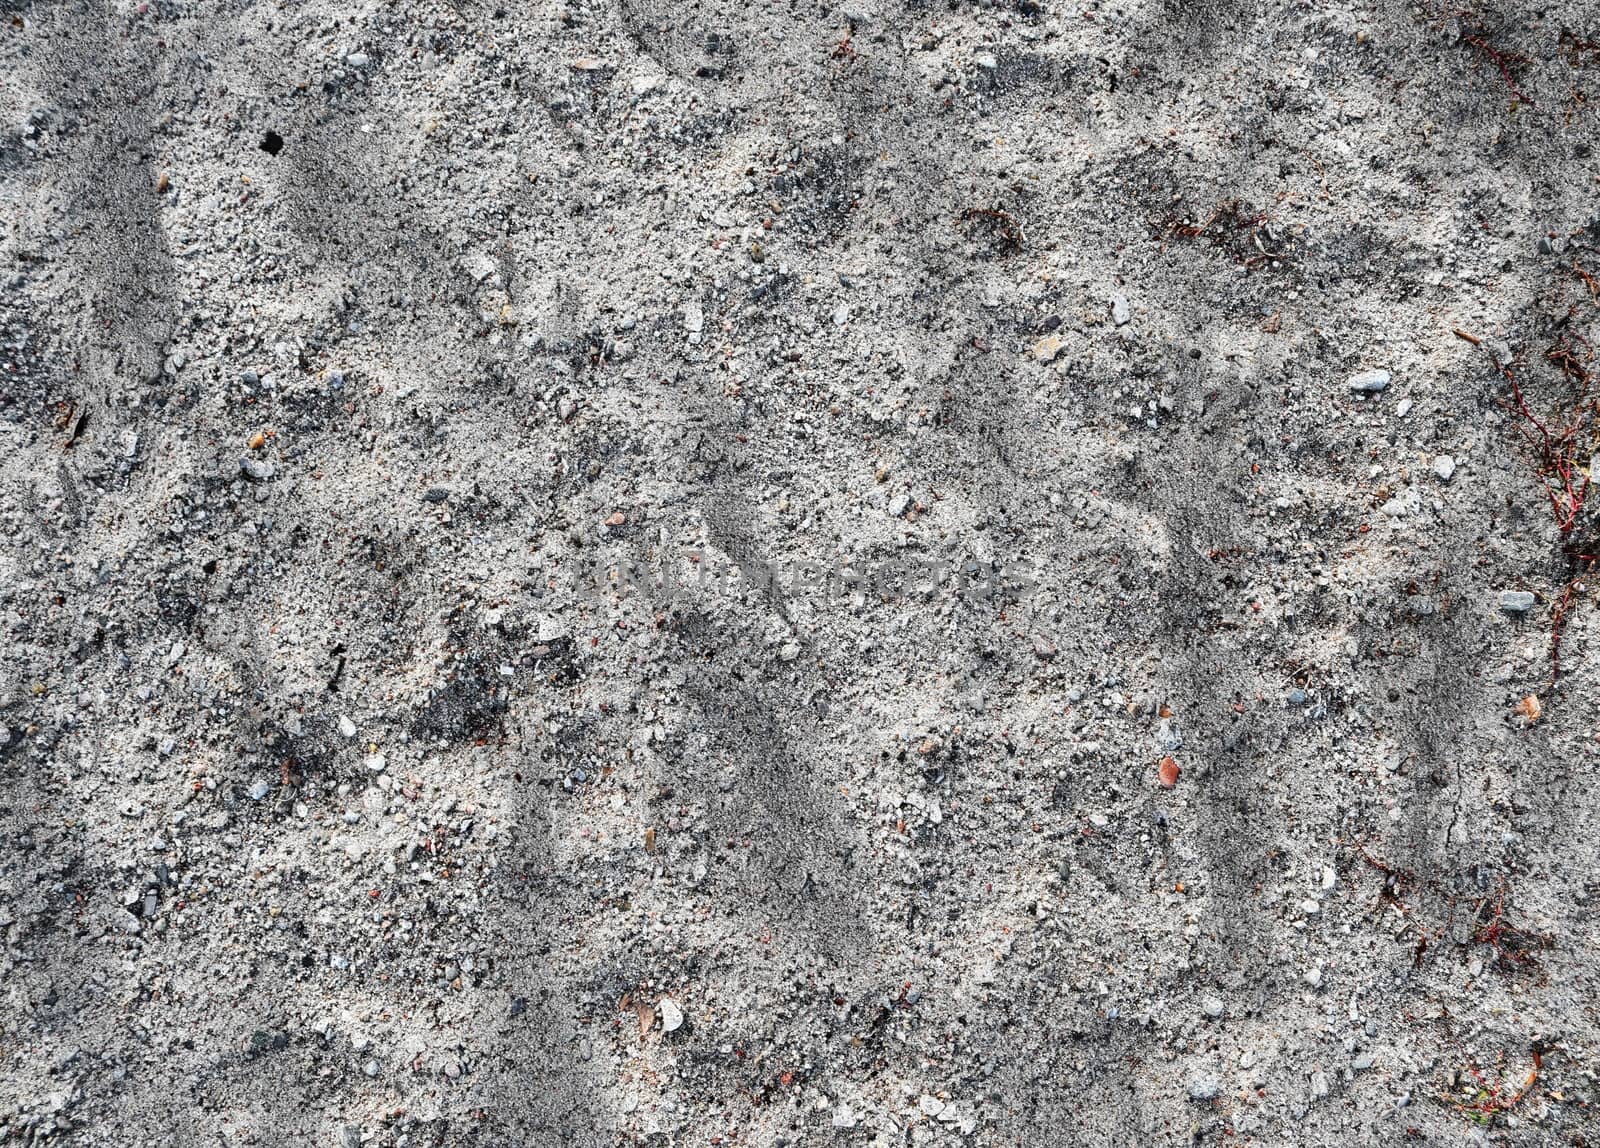 Detailed close up view on sand on a beach at the baltic sea in Germany